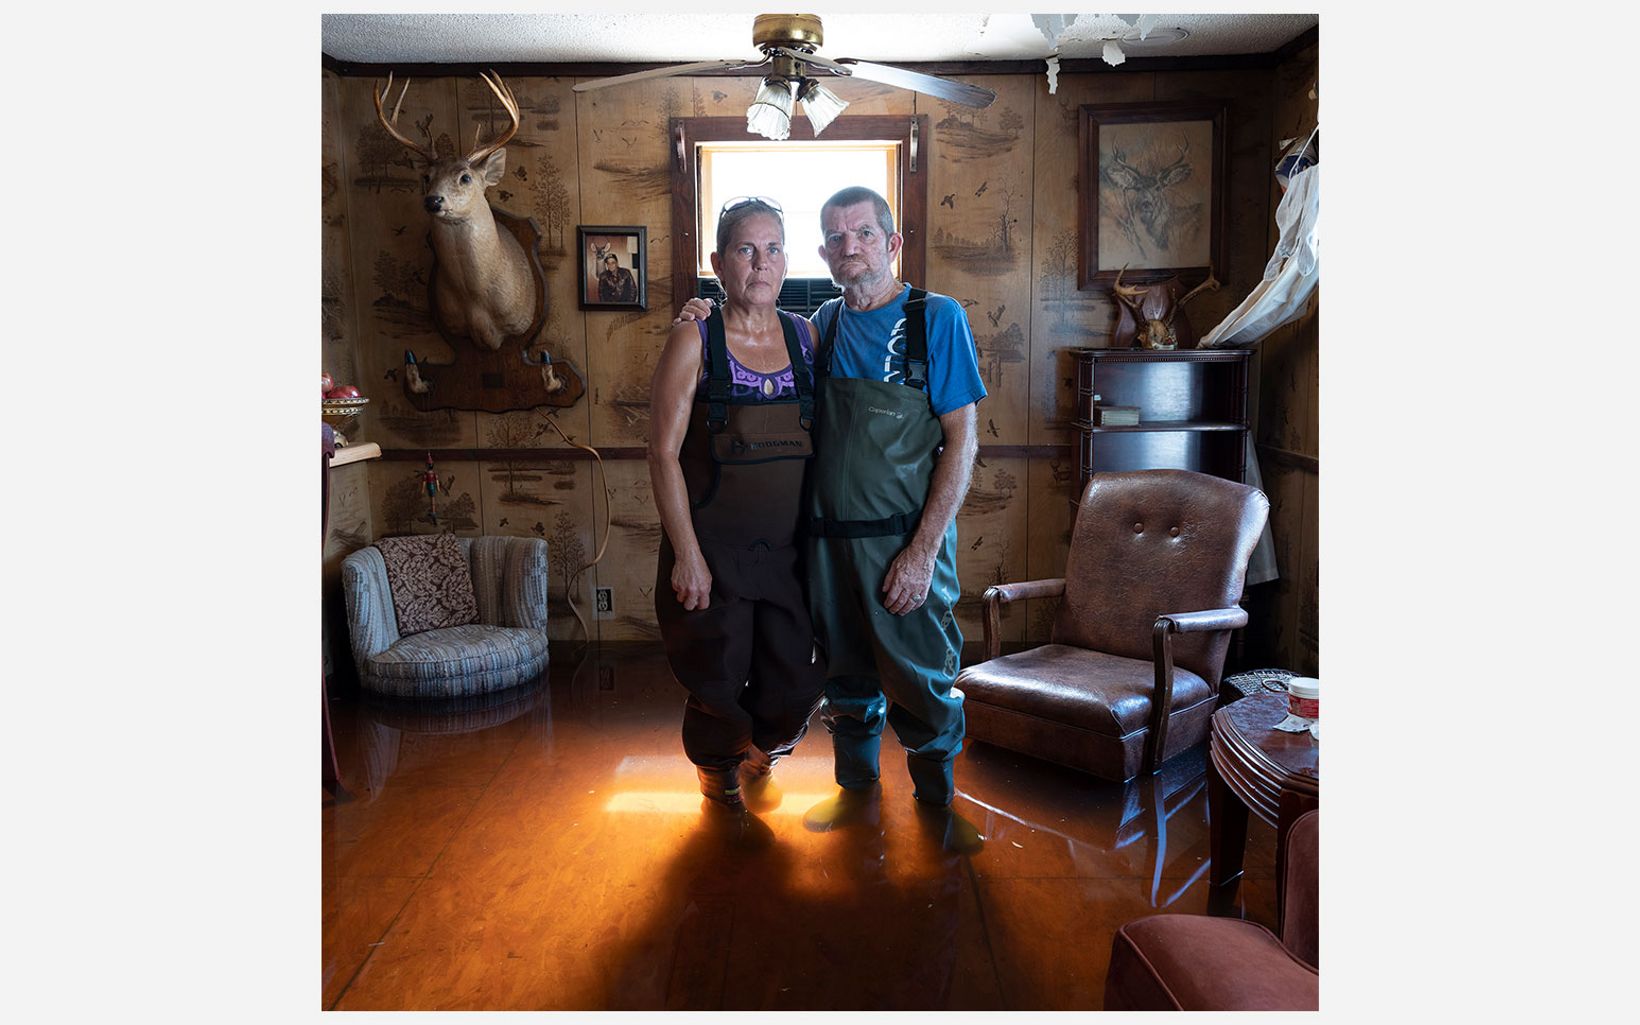 Kimberly and Rudy Fralix stand in their flooded home